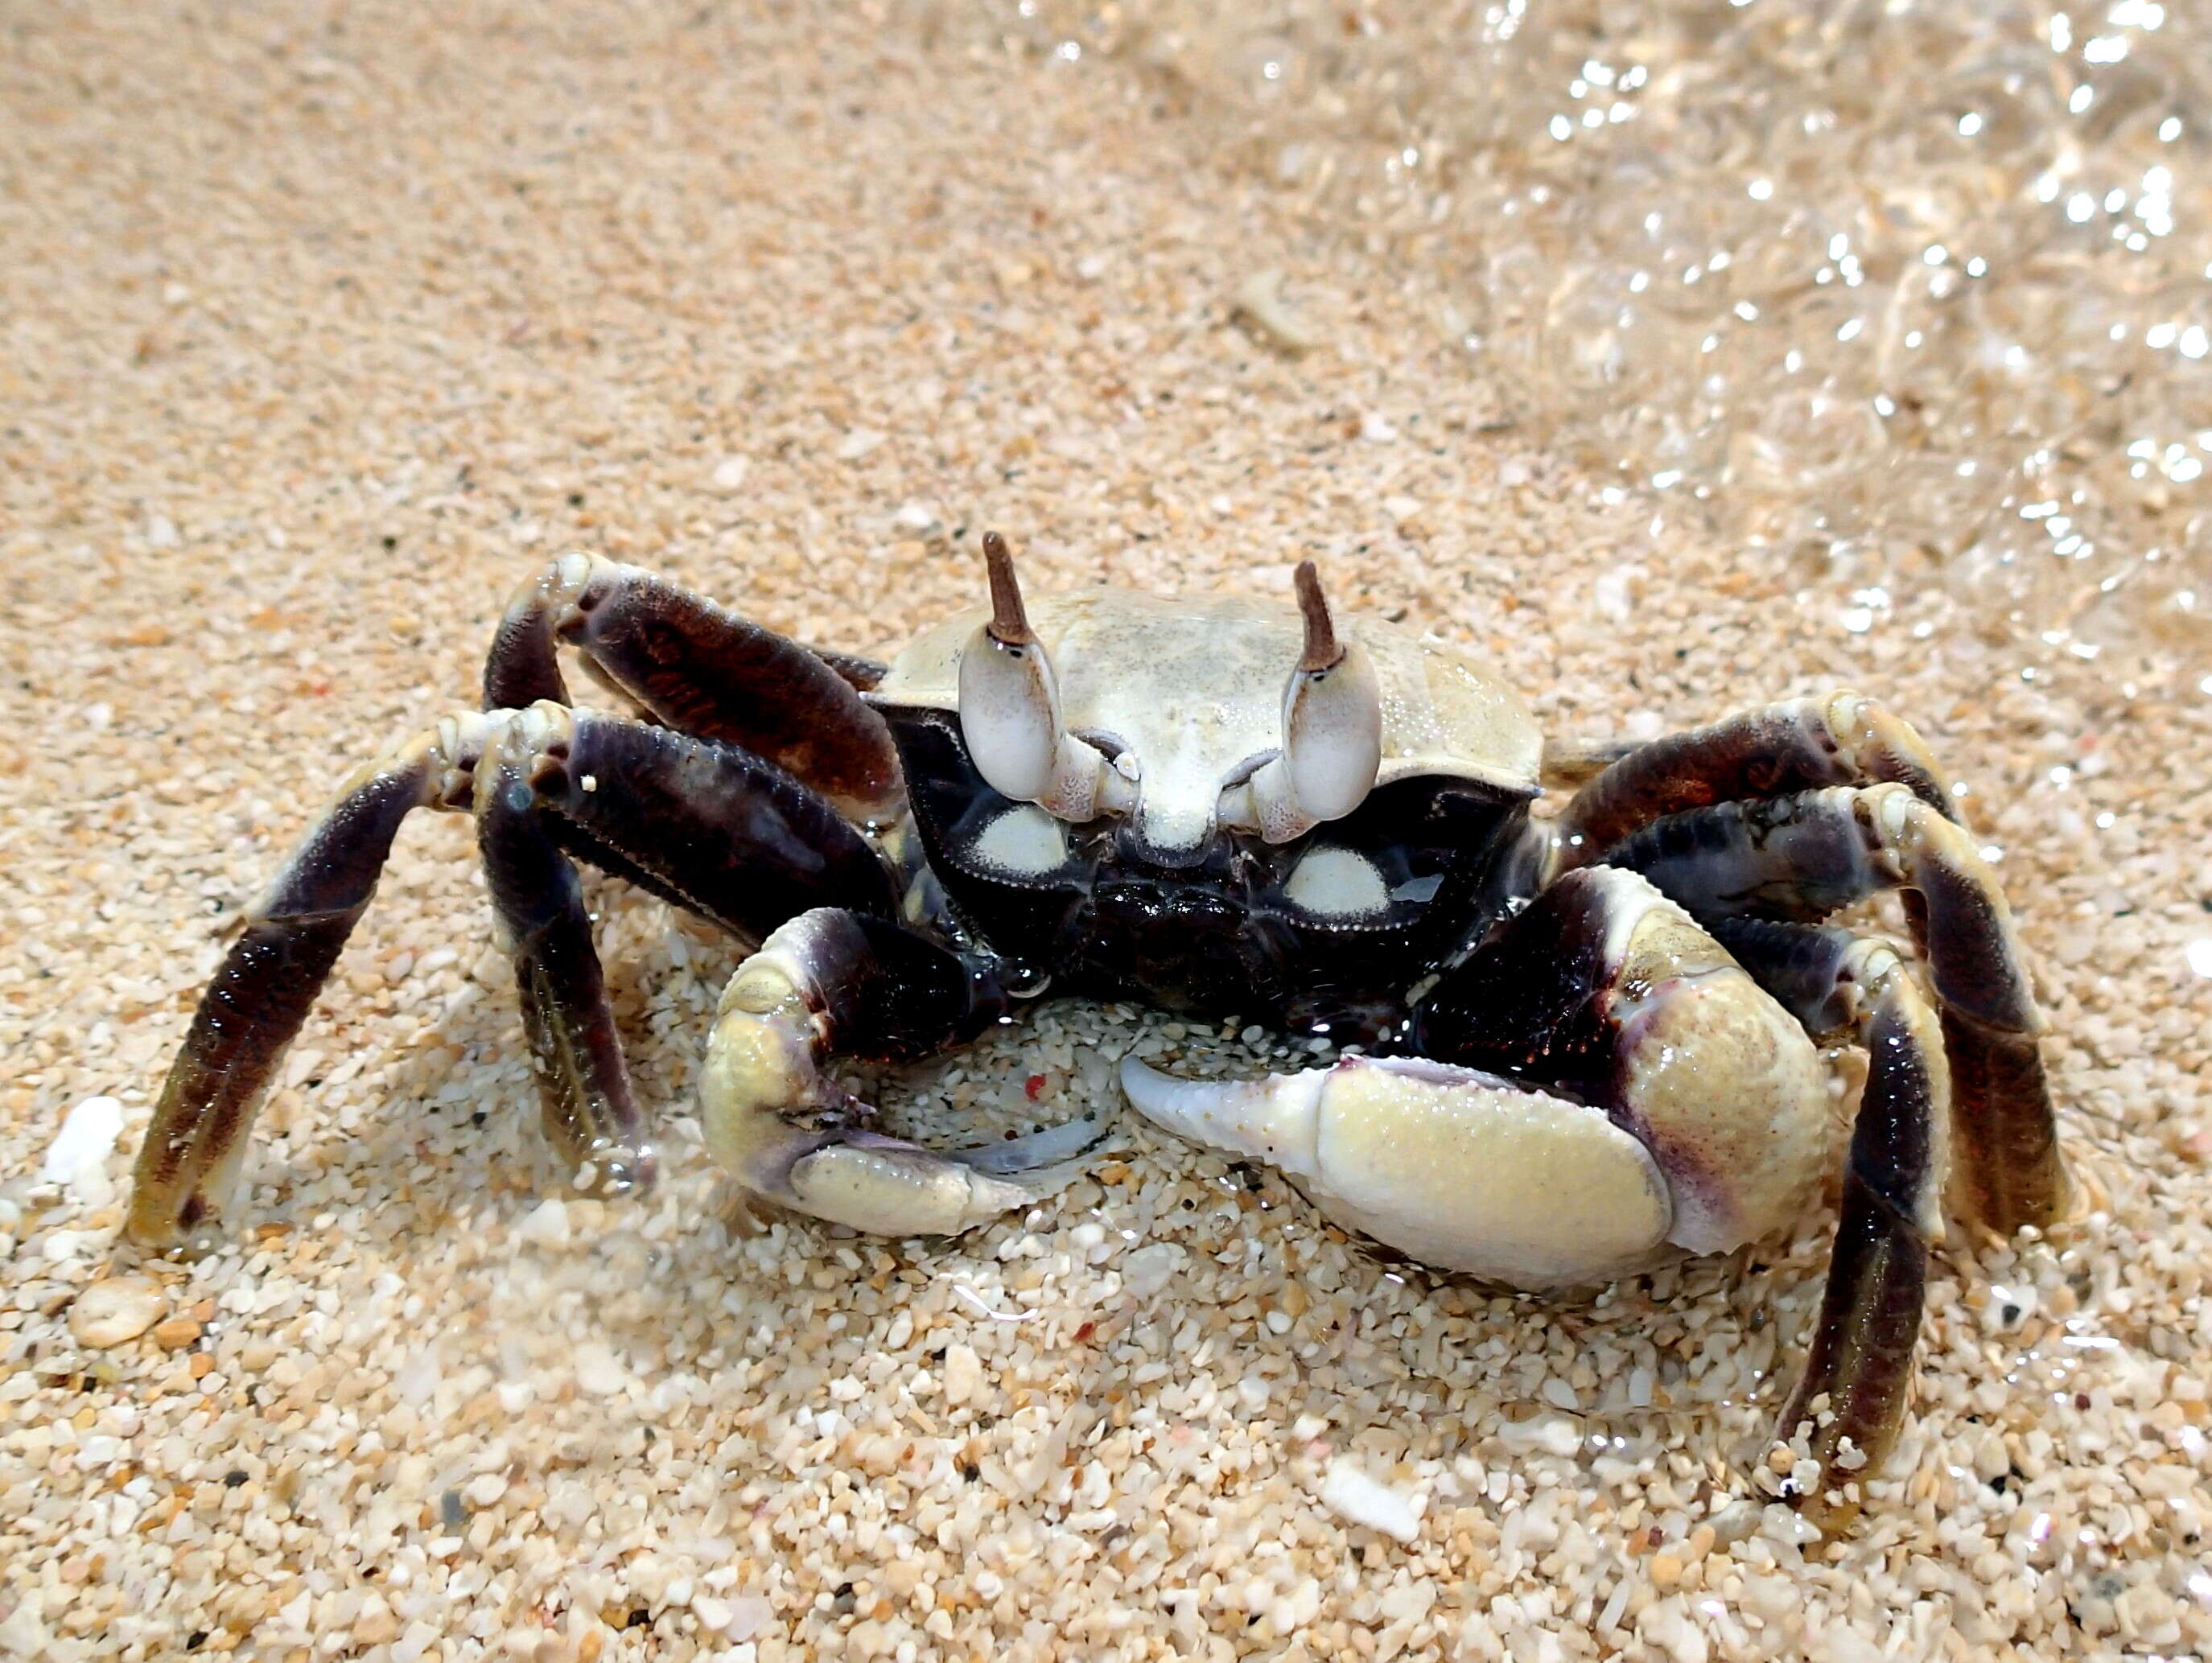 Image of Horned Ghost Crab